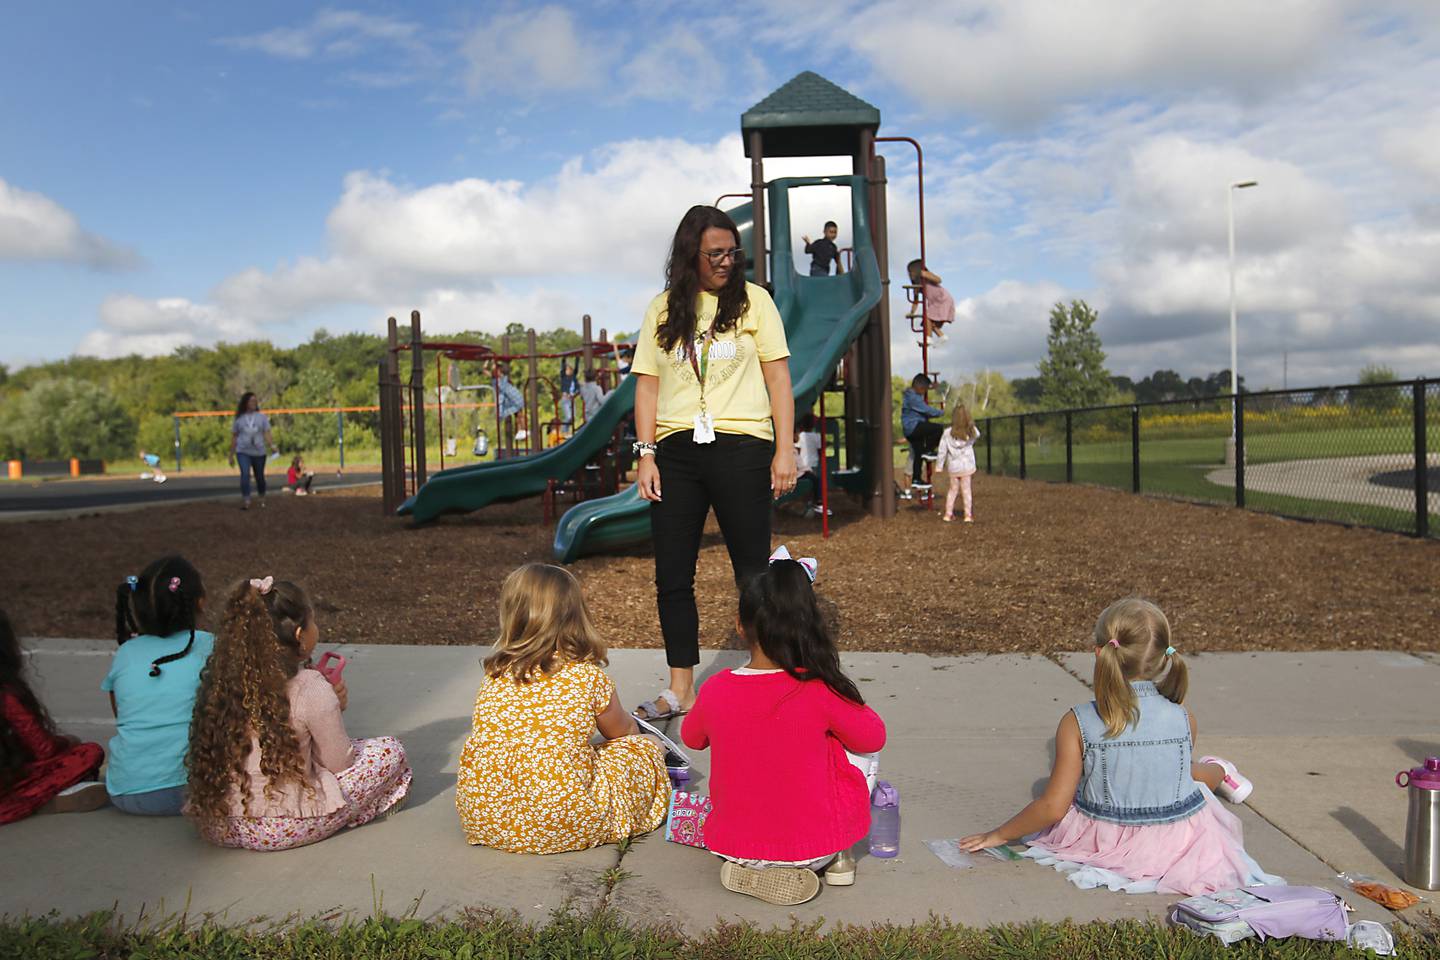 Principal Nikki Kunde talks with students as they eat a snack on the playground Monday morning, August 15, 2022, during the first day of school at District 200’s Prairiewood Elementary School. Many McHenry County area schools return to session this week.